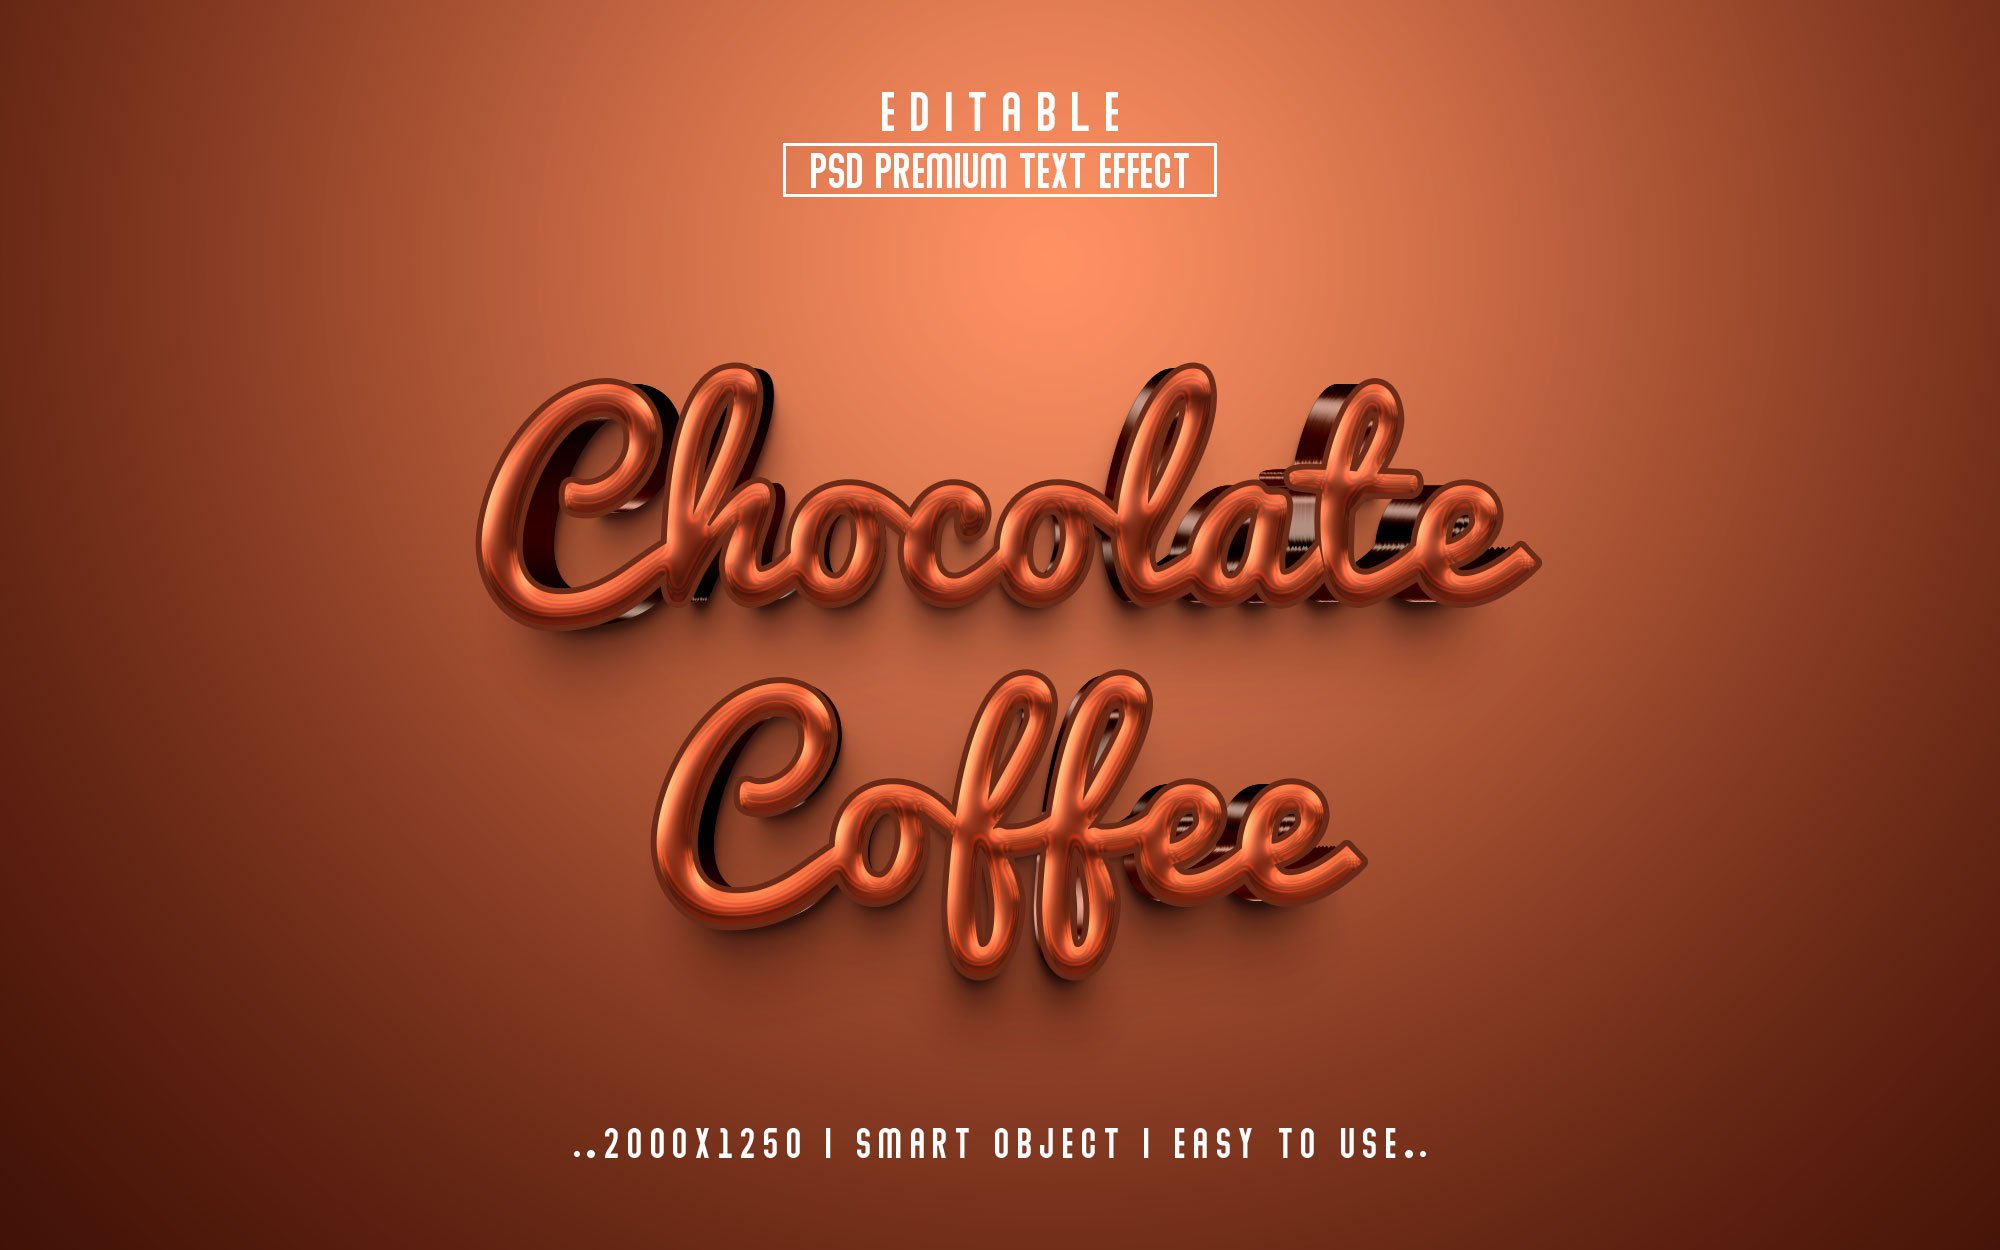 Chocolate Coffee 3D Editable Textcover image.